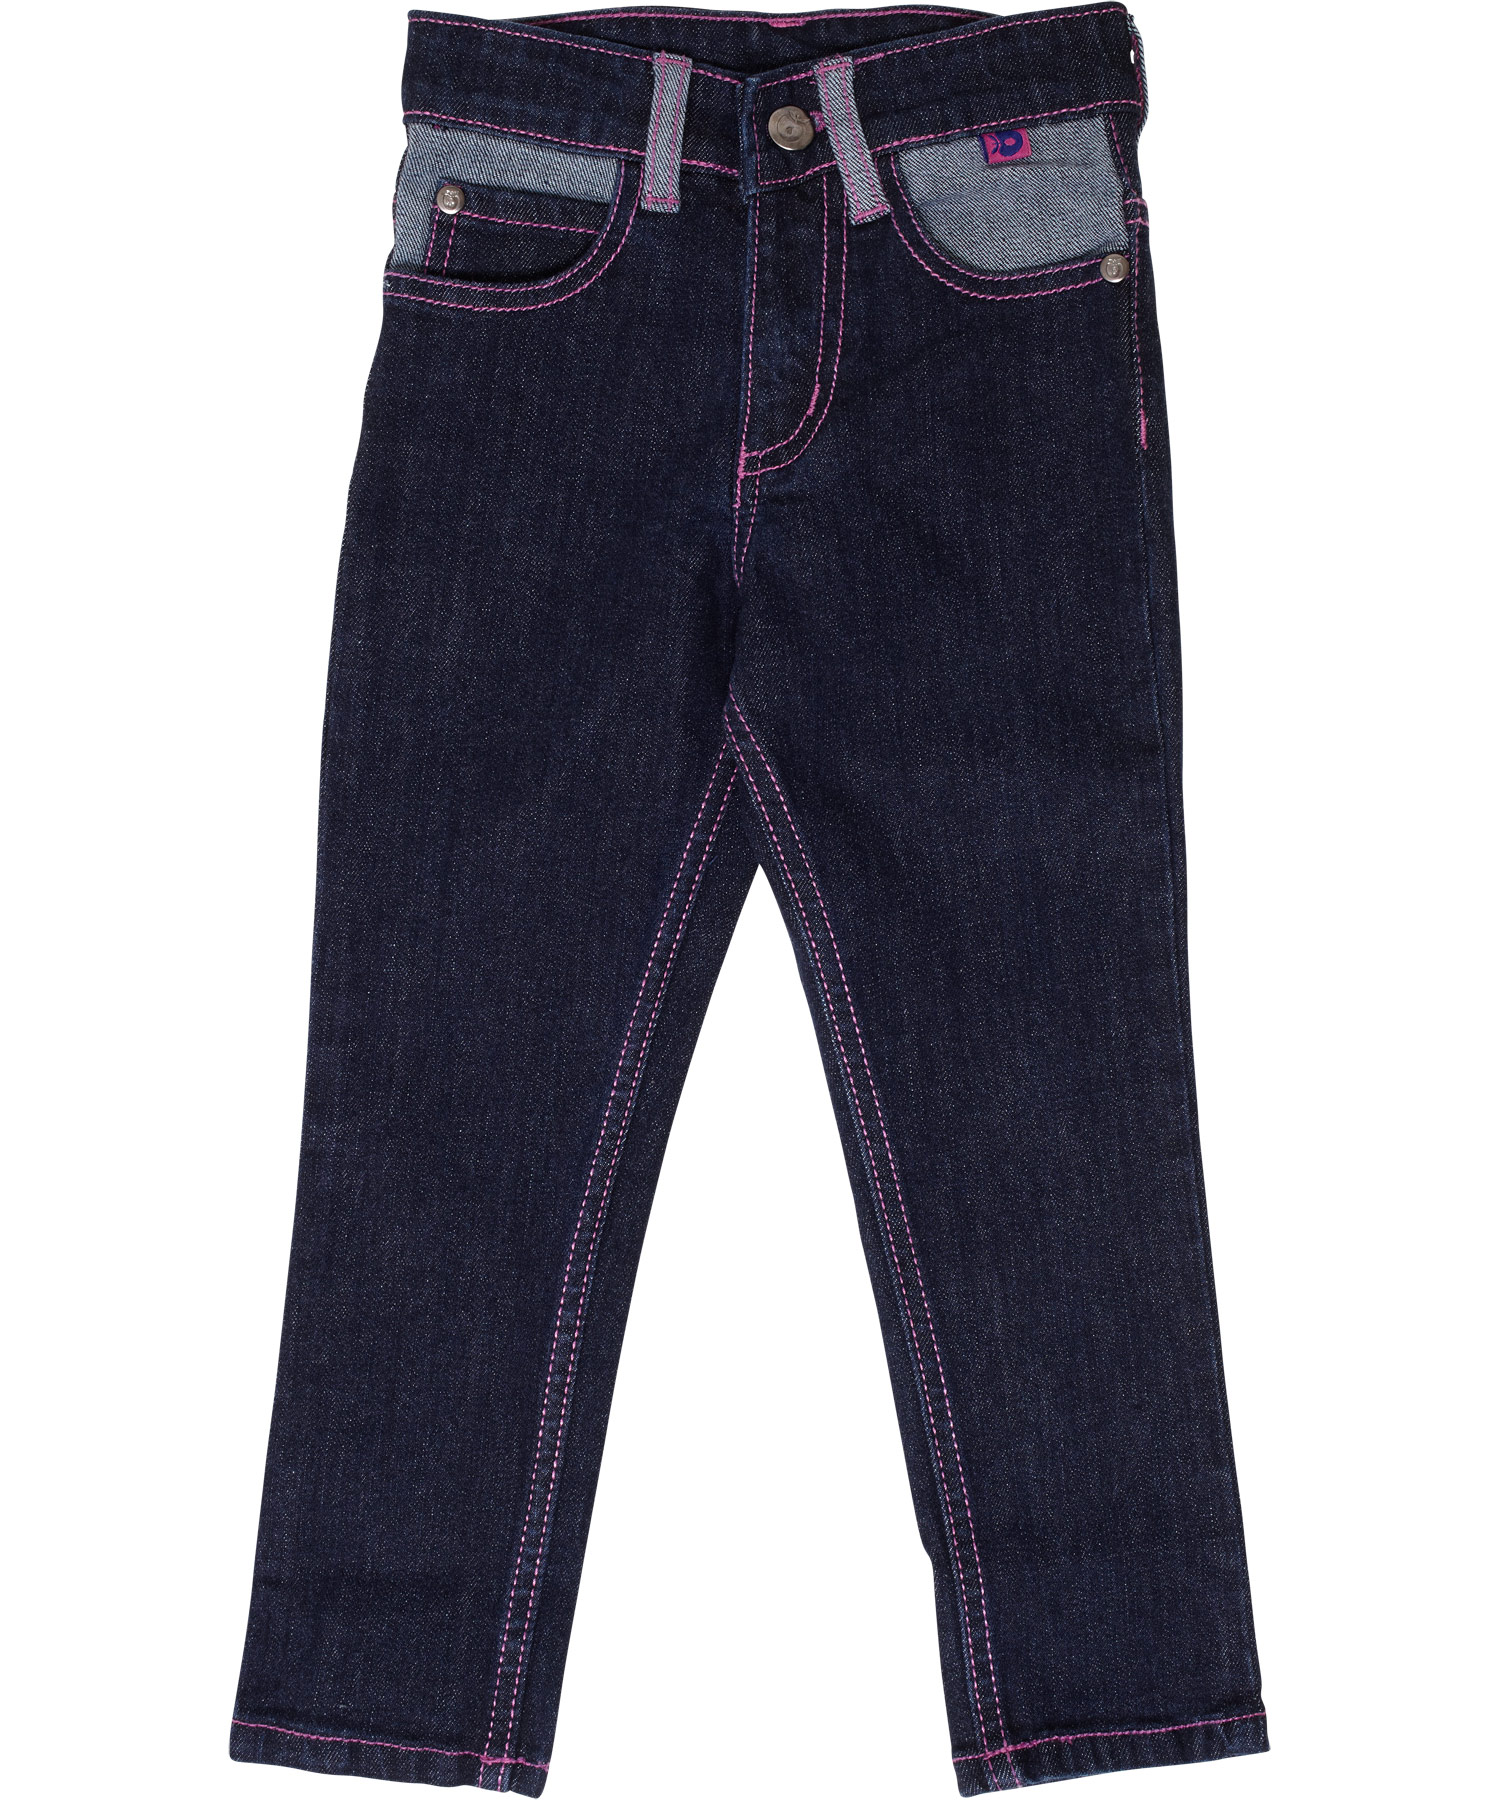 New! Småfolk trendy jeans with pink stitches and bright back pockets ...